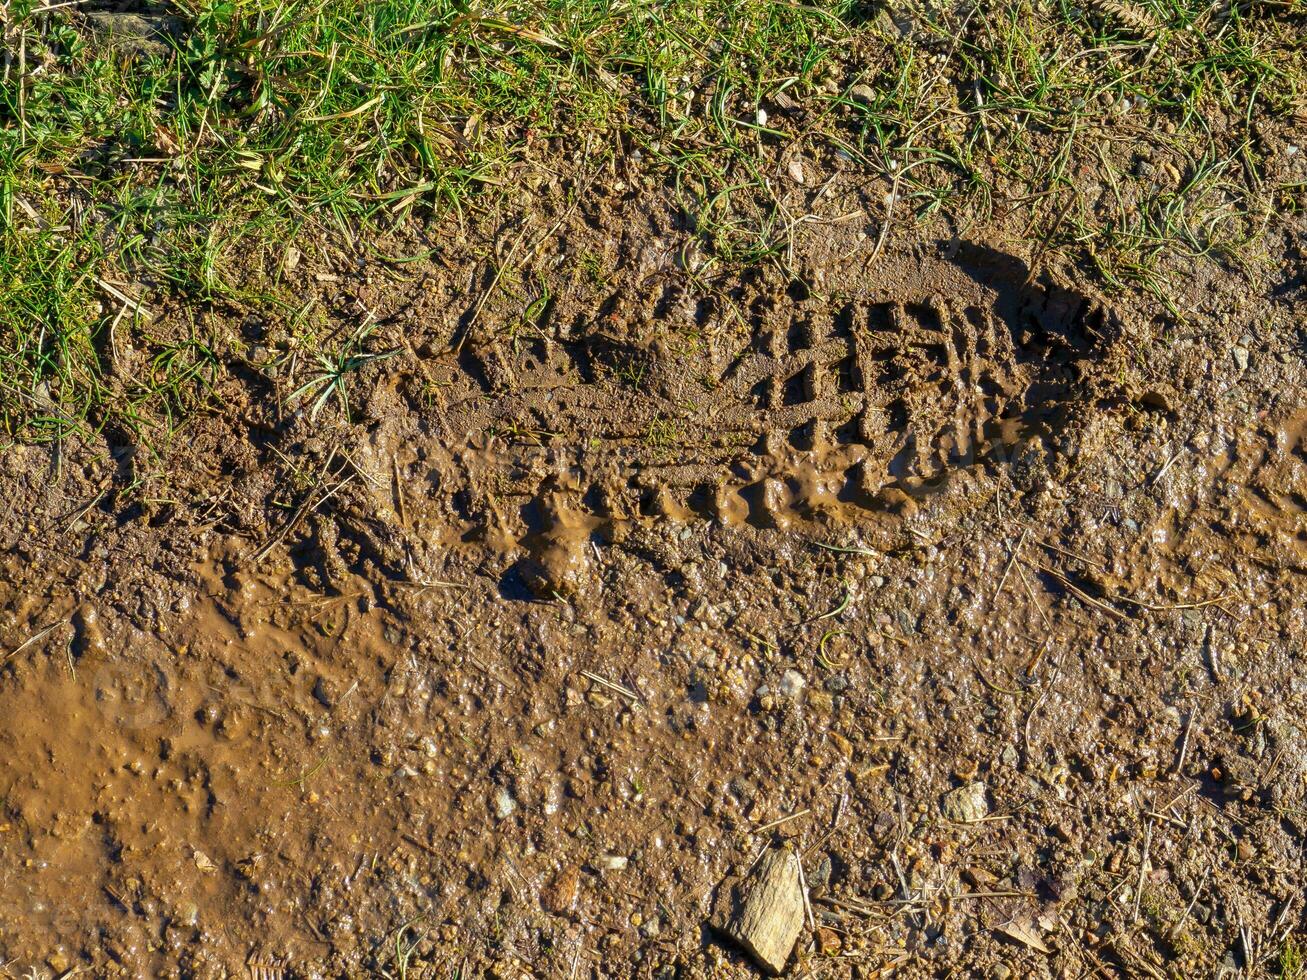 Footprint in the mud - grass and mud texture photo